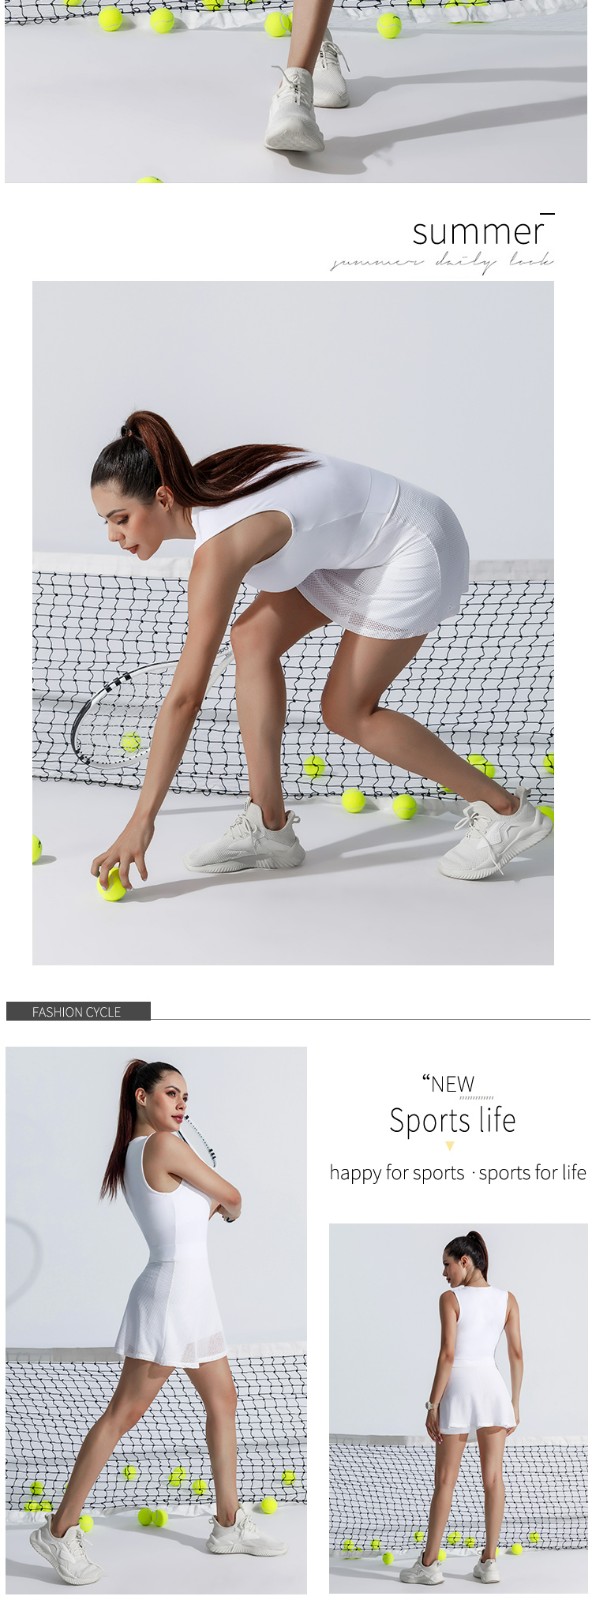 INGOR custom women's tennis outfits supplier at the gym-5